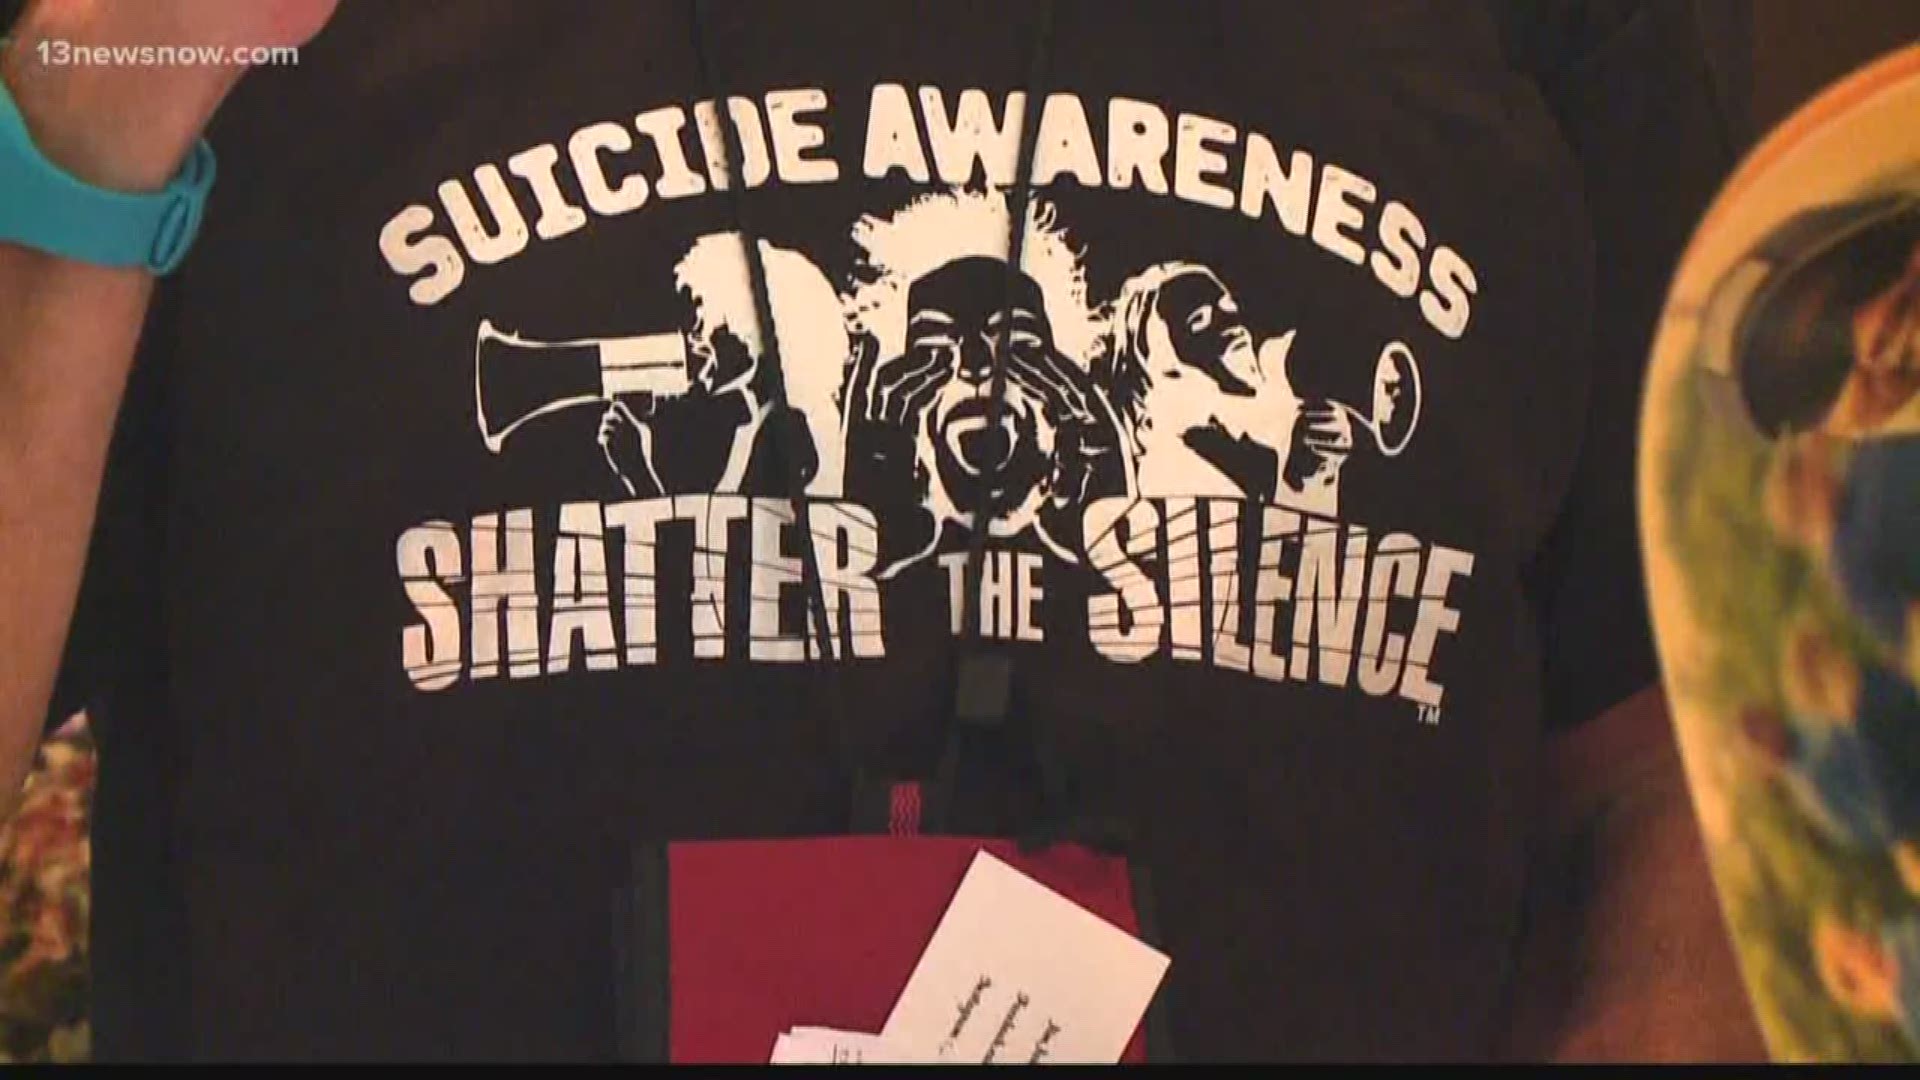 There's a group in Hampton Roads that wants to 'Shatter the Silence!'